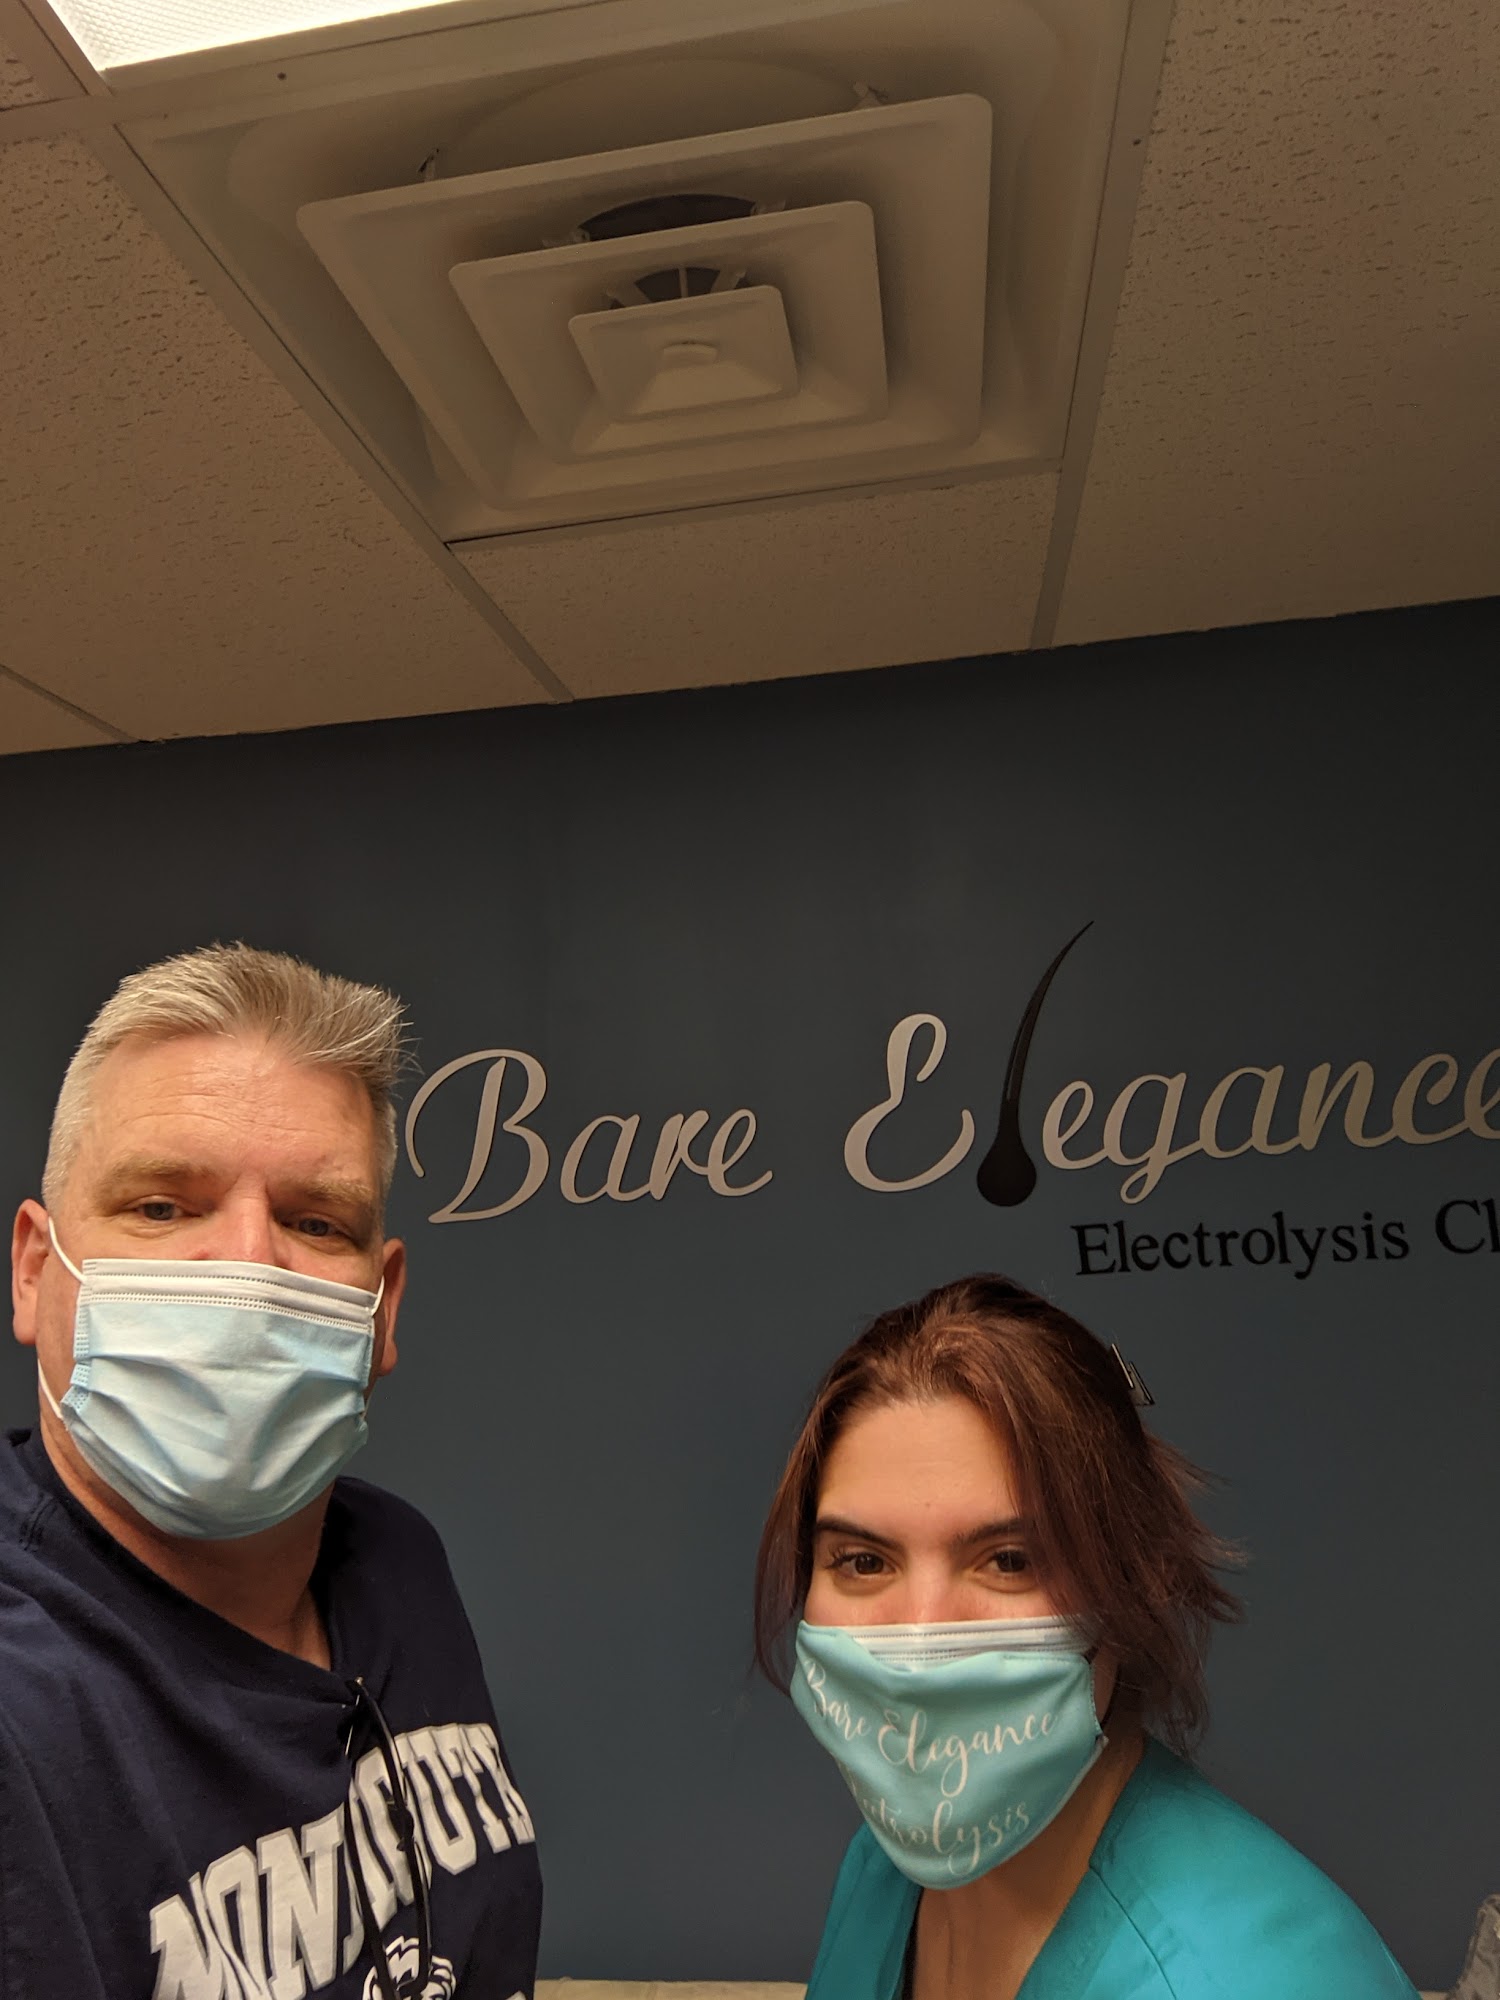 Bare Elegance Electrolysis Clinic 239 New Rd Building B Suite 103, Parsippany New Jersey 07054